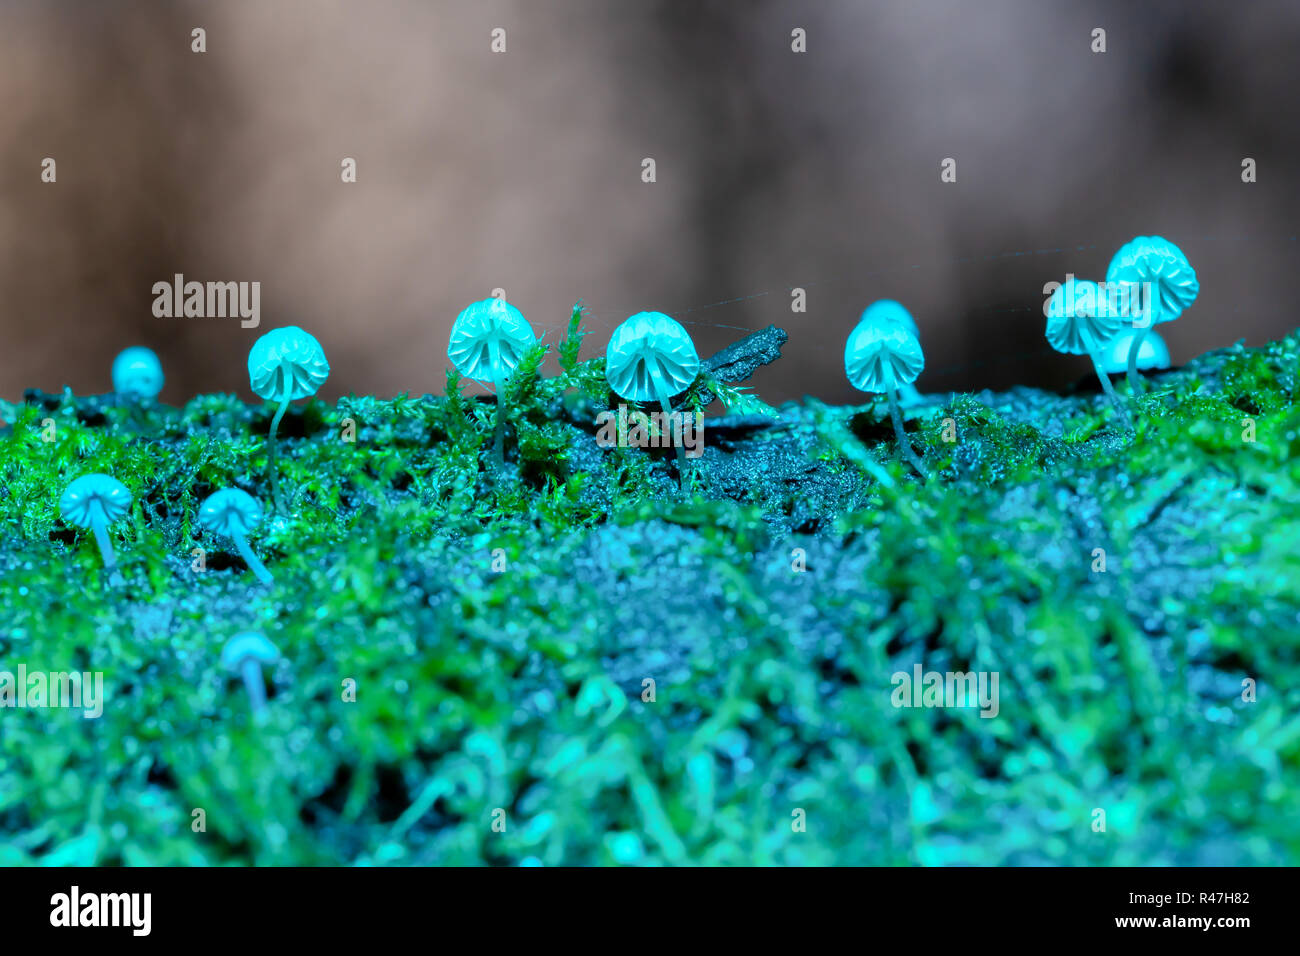 Macro photograph of a sparse cluster of Fairy Inkcap Mushrooms amongst moss with blue flash from underneath. Stock Photo